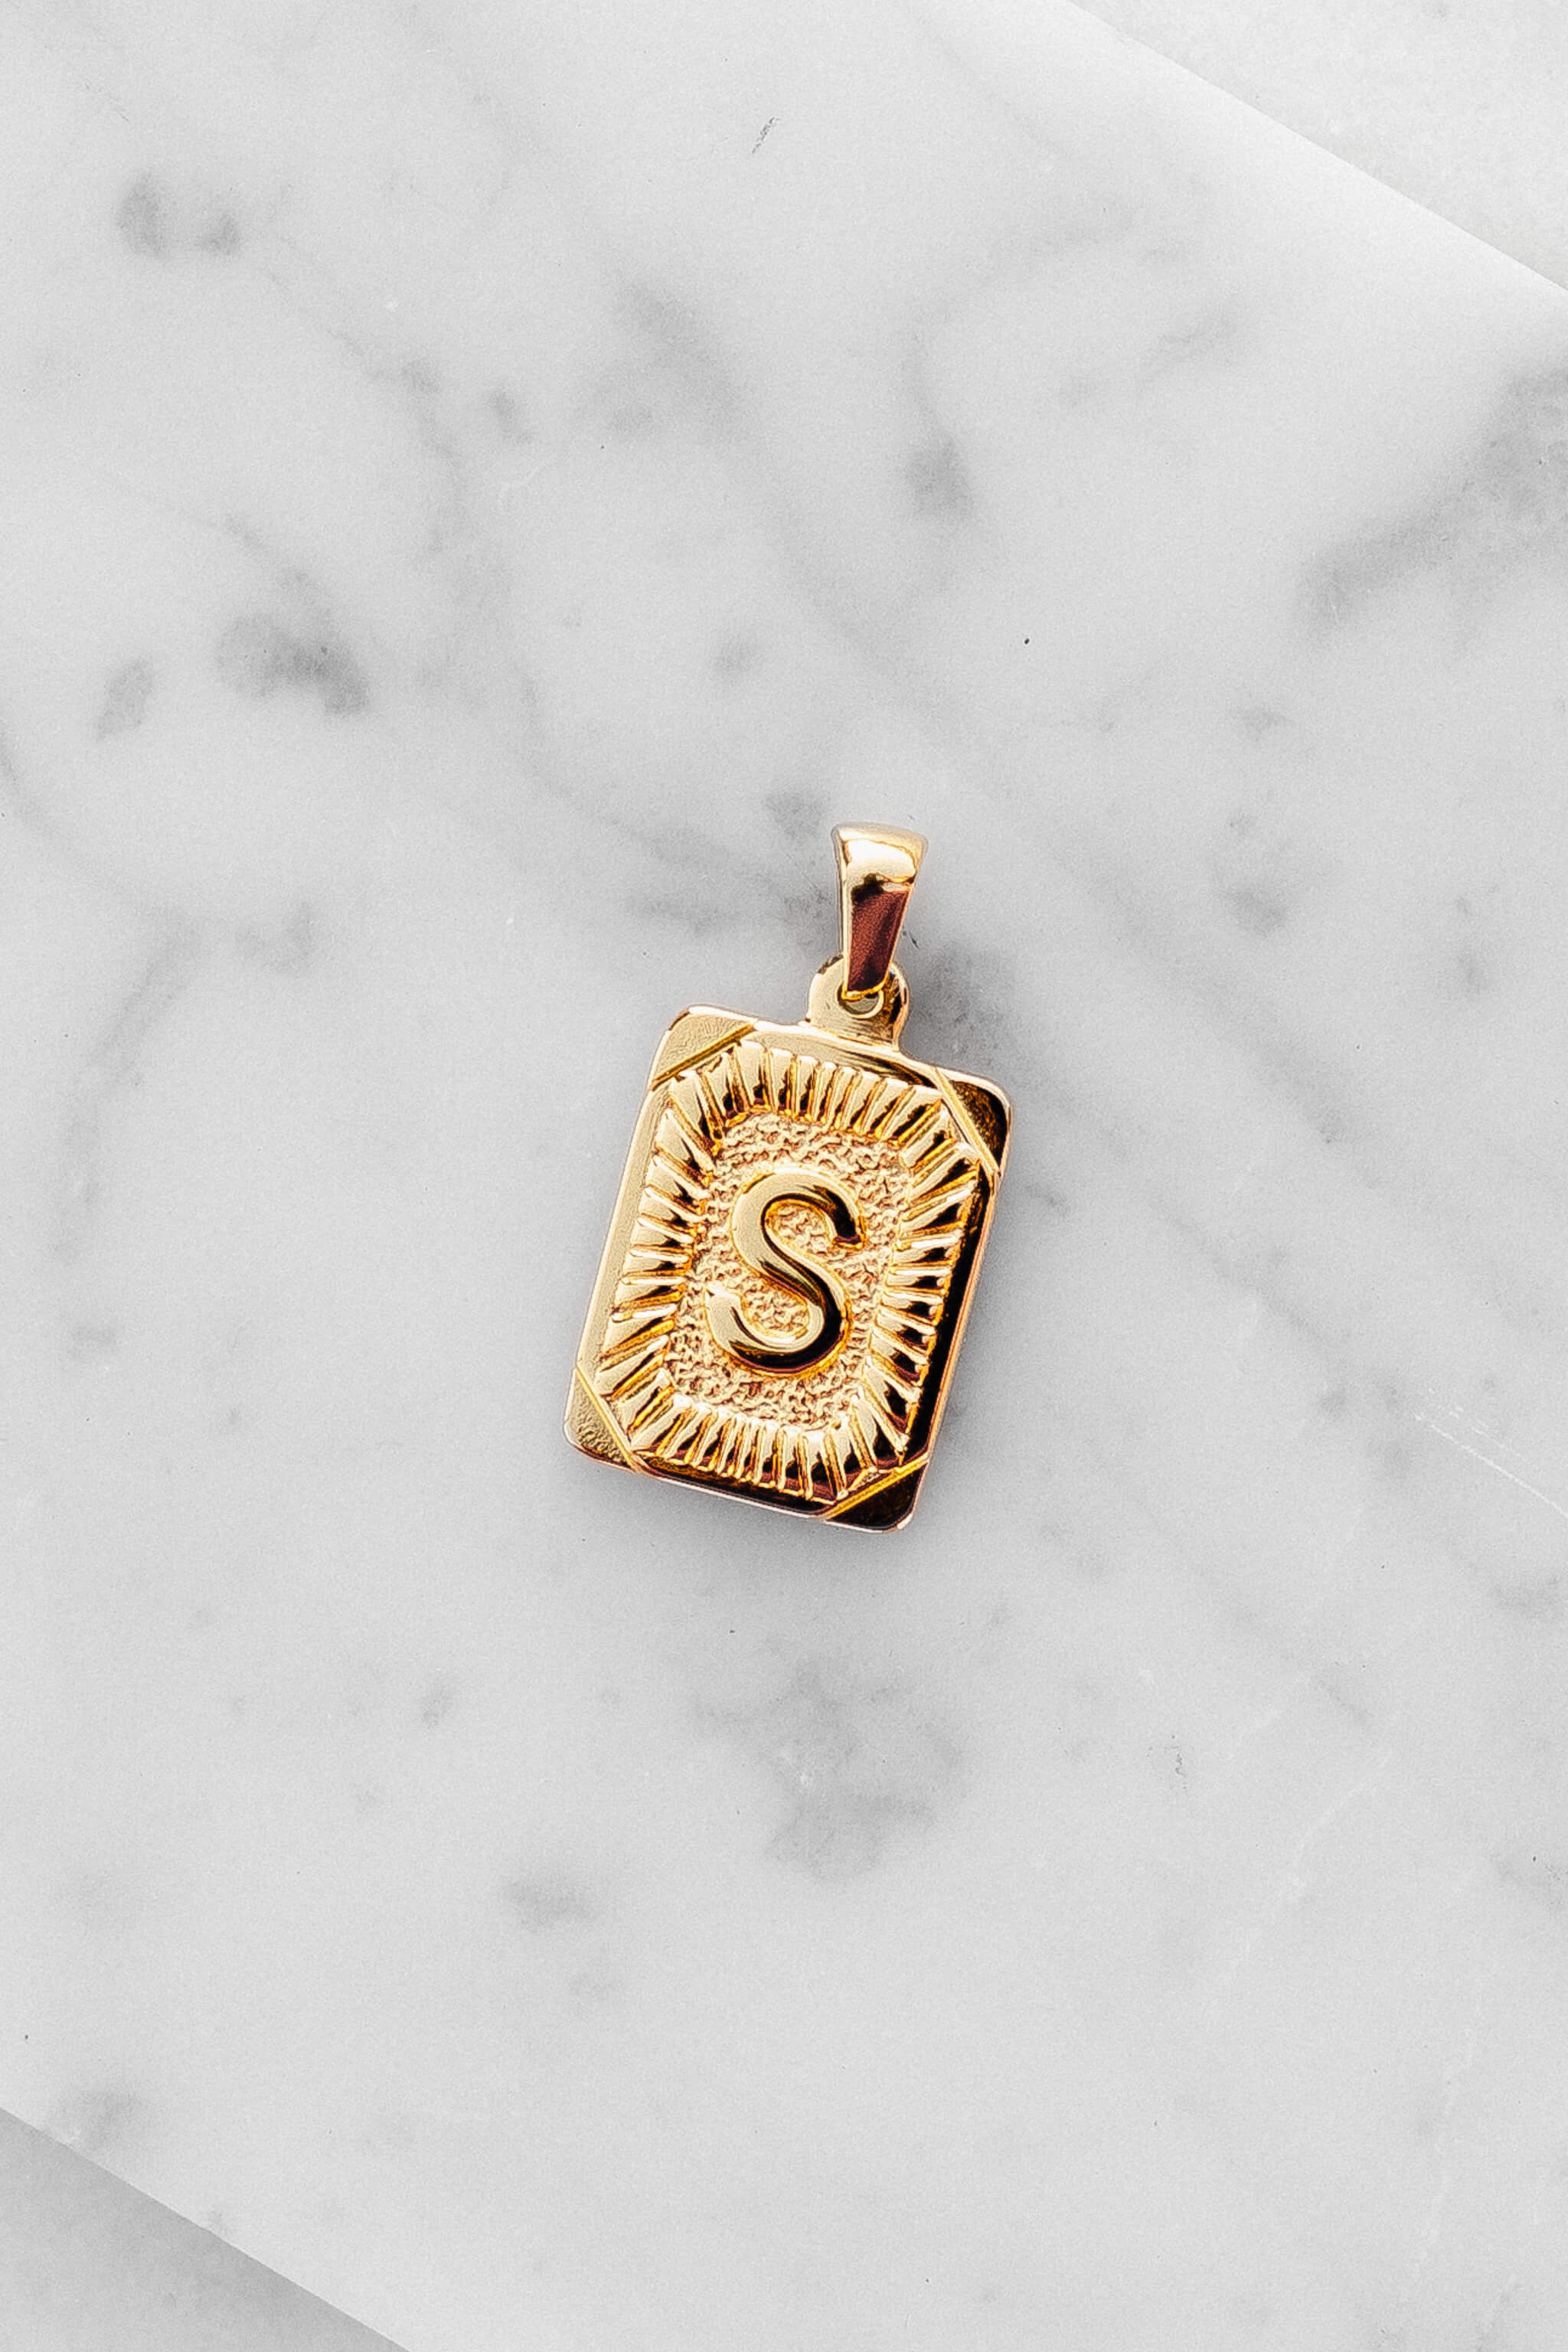 Gold Monogram Letter "S" Charm laying on a marble